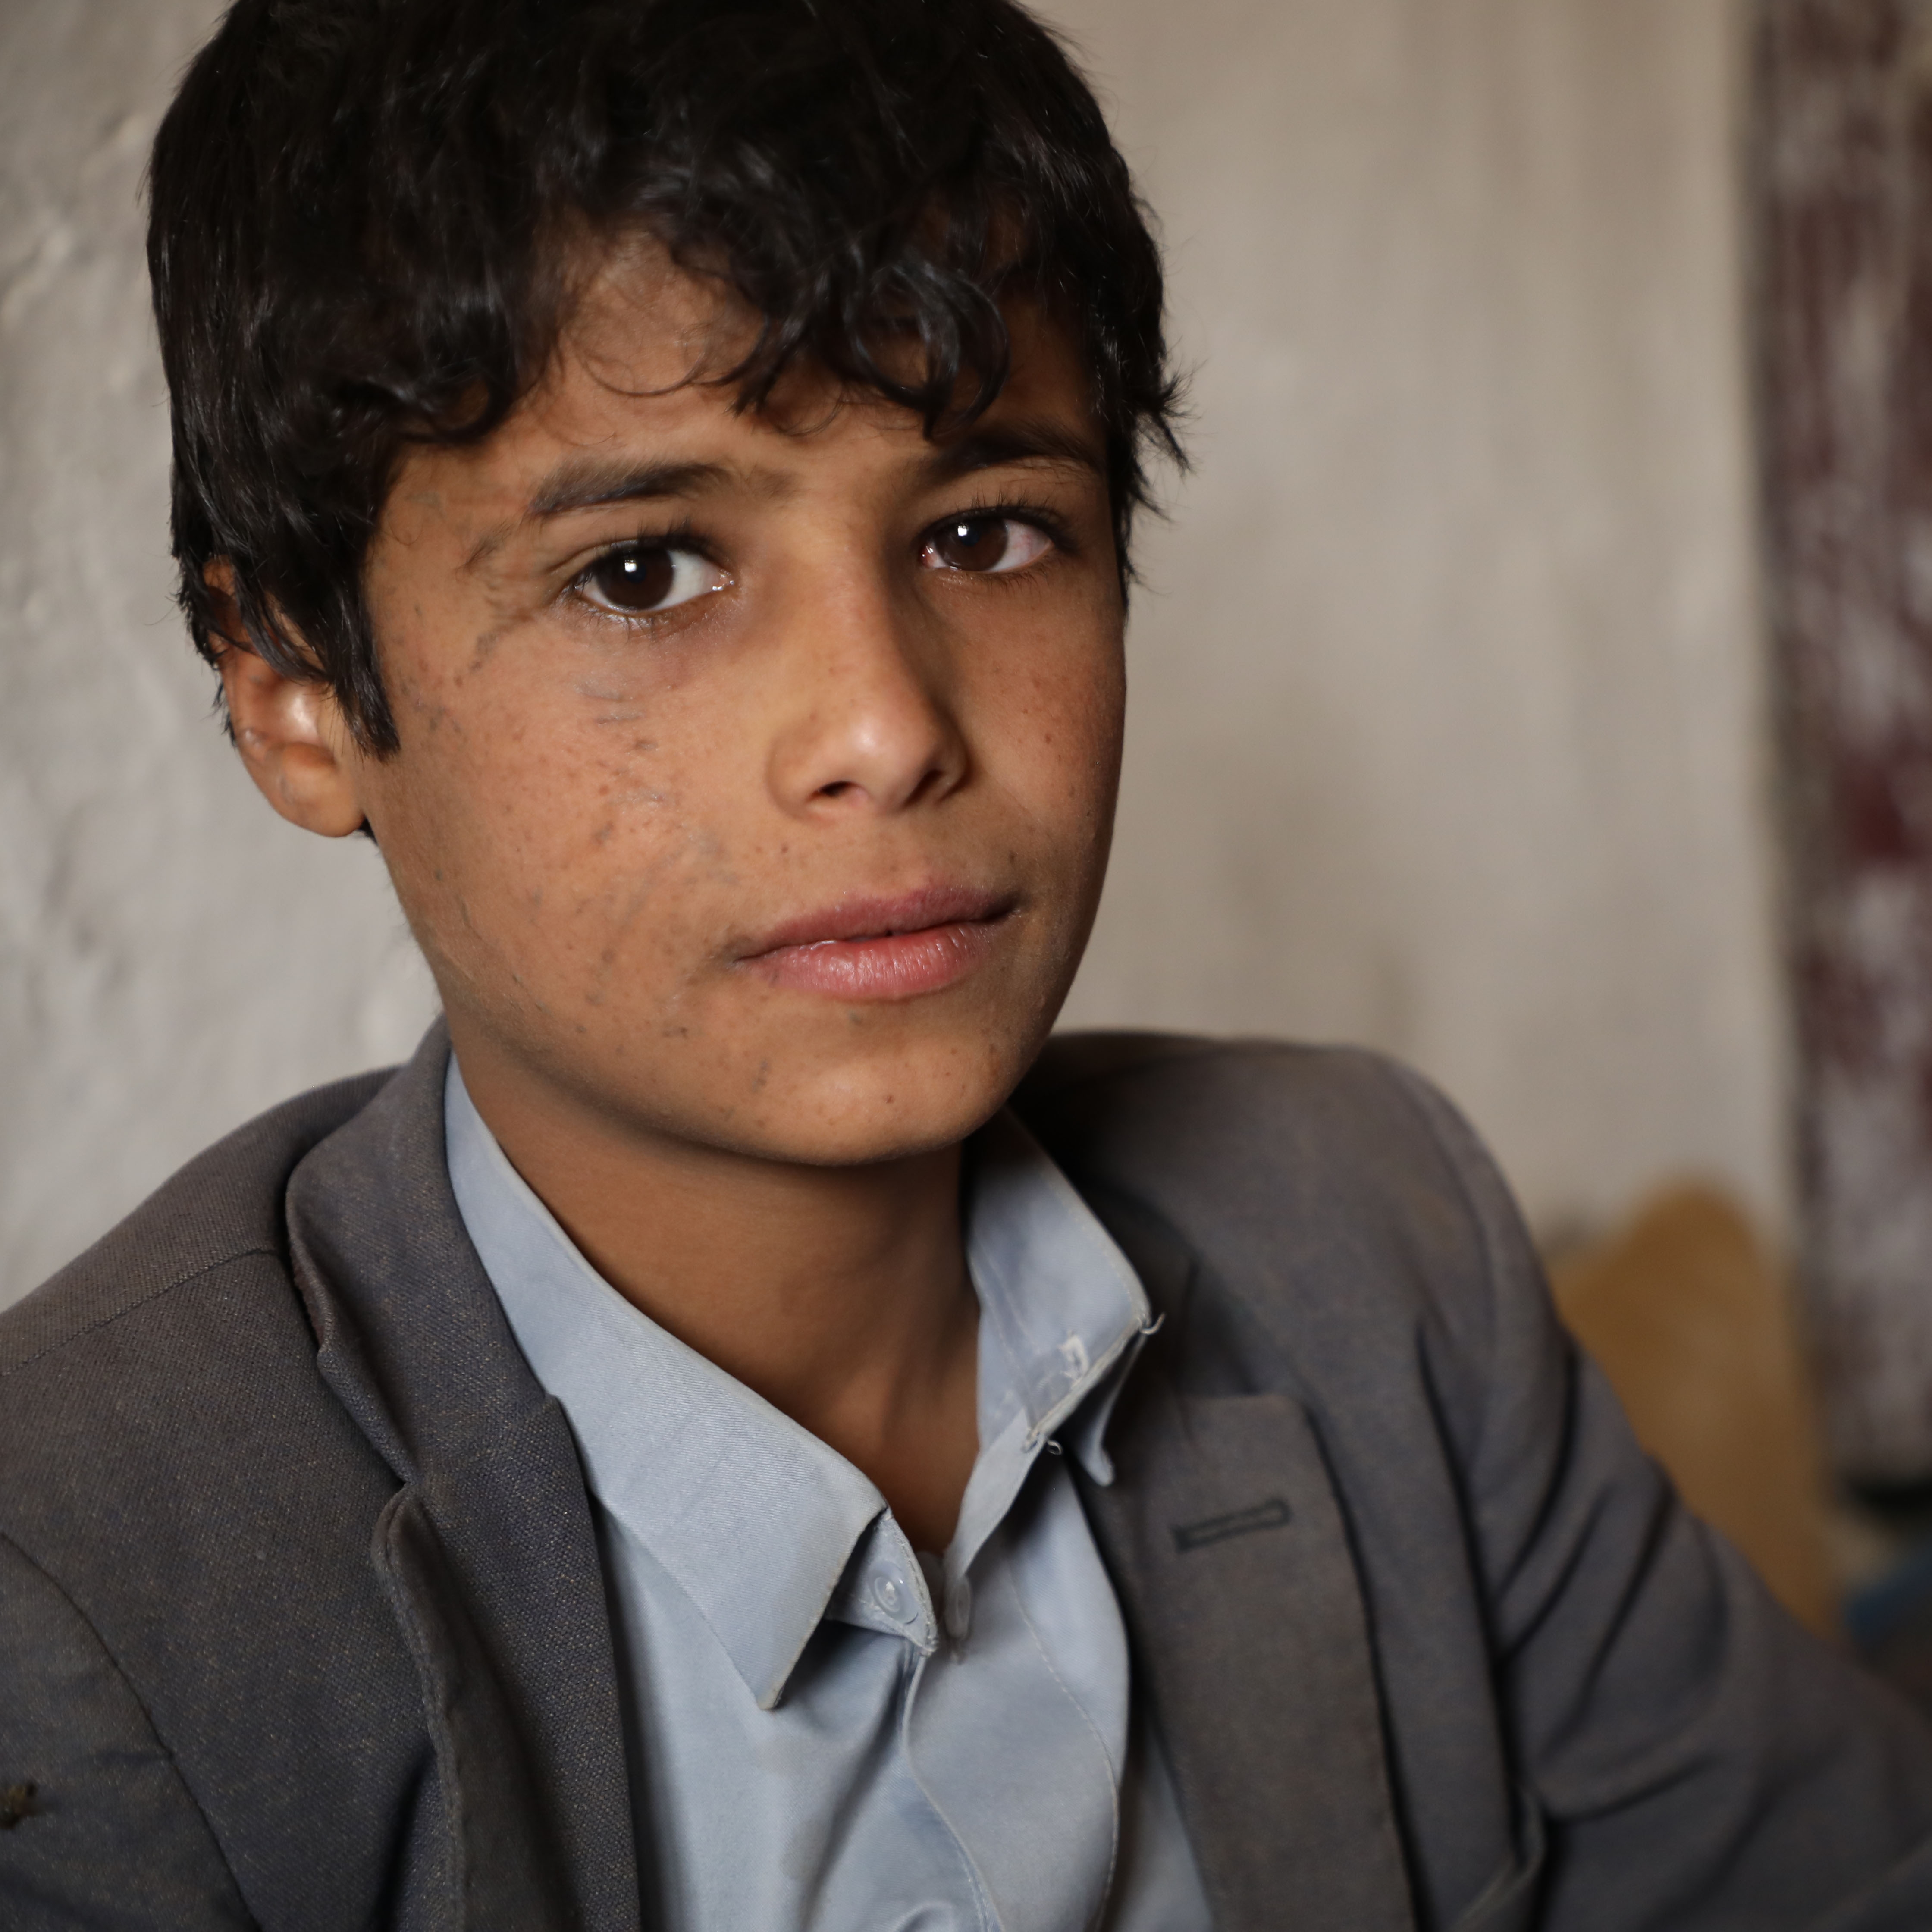 Musa*, was severely injured in his eye from an airstrike which targeted his school bus in Yemen.